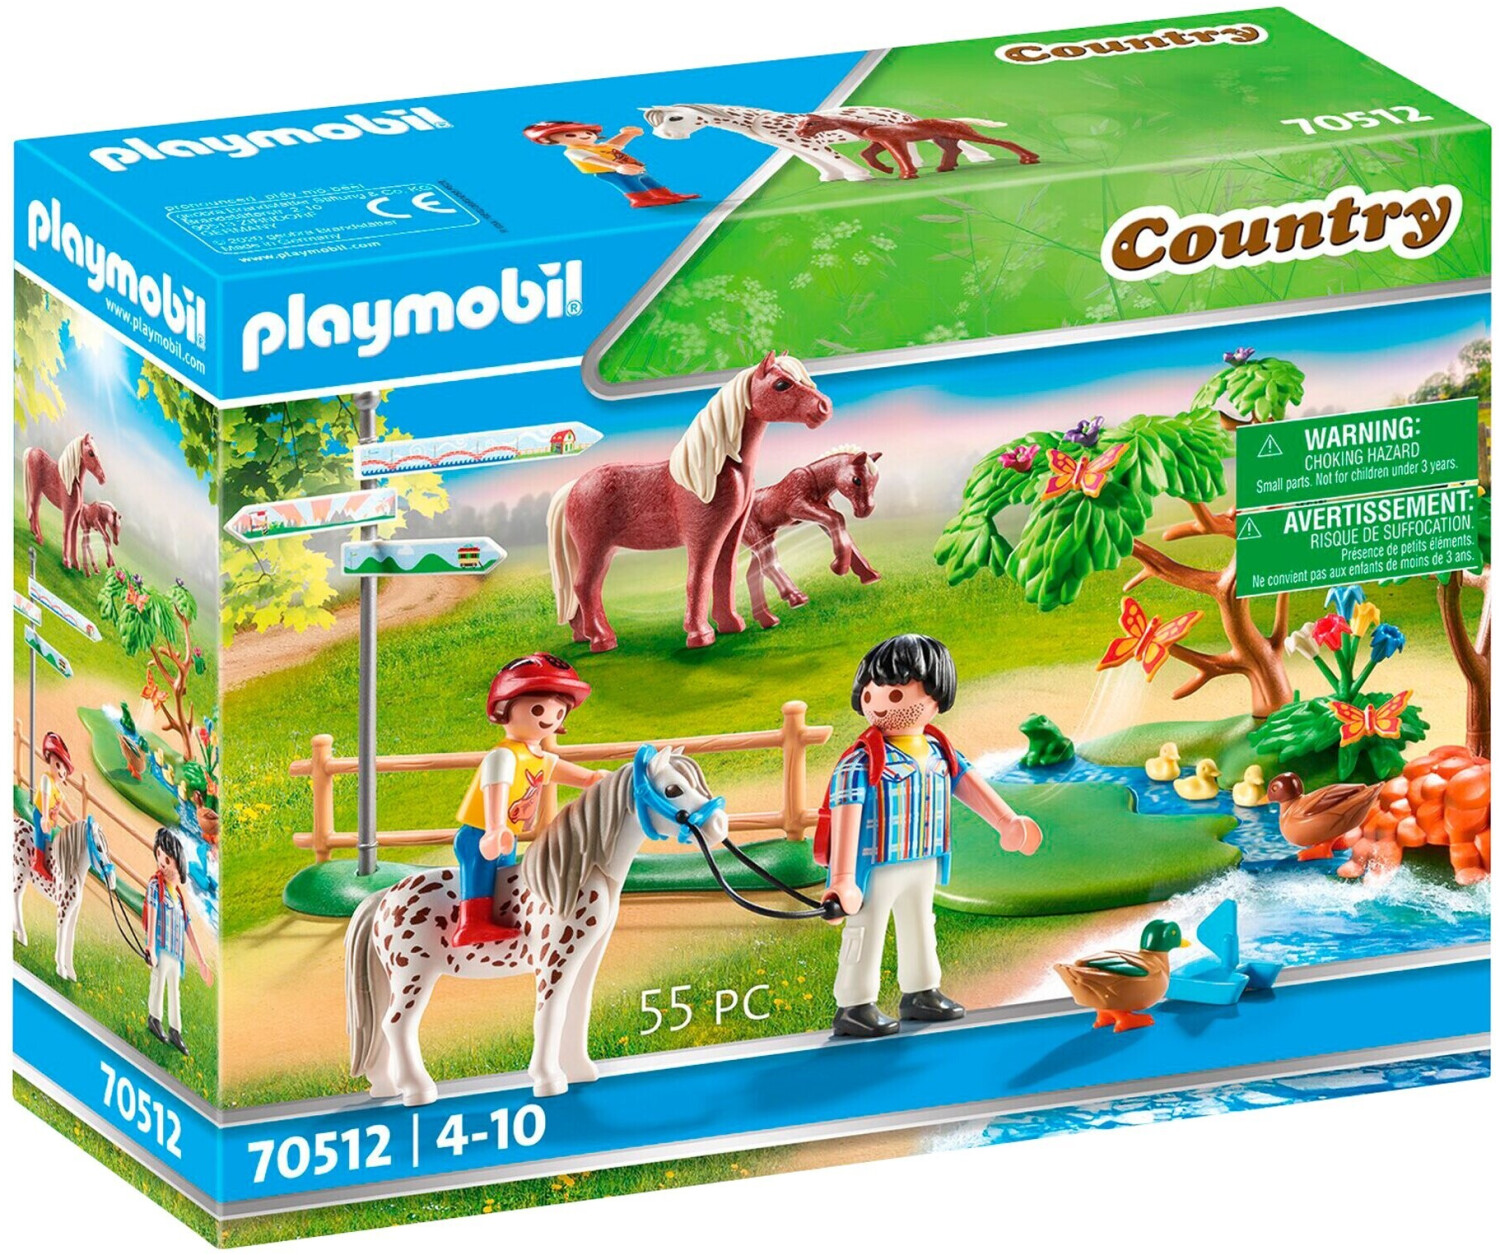 Image of Playmobil Country 70512